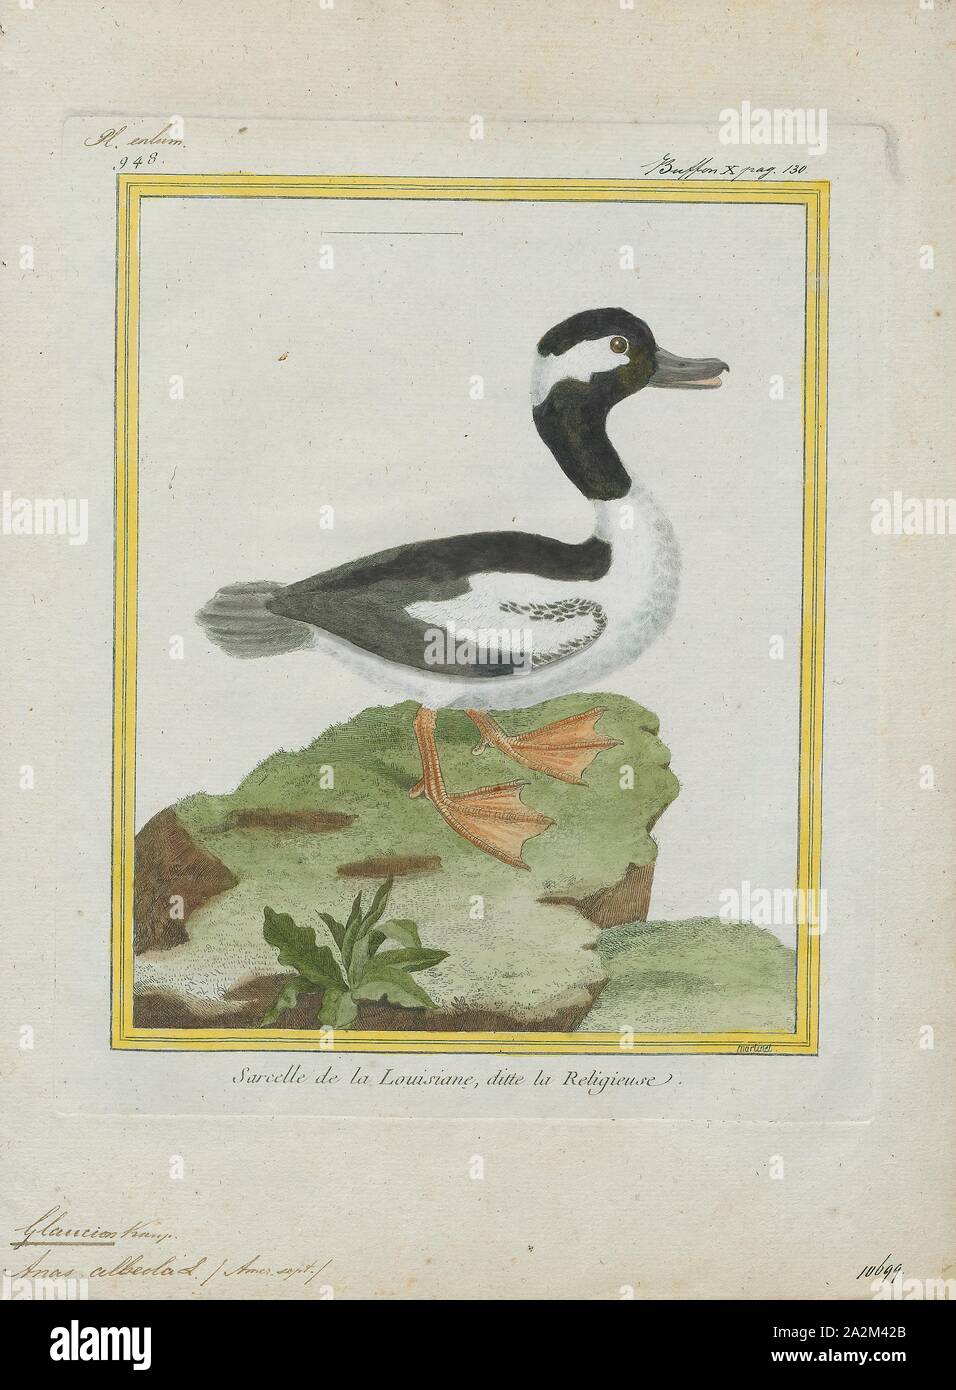 Bucephala albeola, Print, The bufflehead (Bucephala albeola) is a small sea duck of the genus Bucephala, the goldeneyes. This species was first described by Linnaeus in his Systema naturae in 1758 as Anas albeola., 1700-1880 Stock Photo